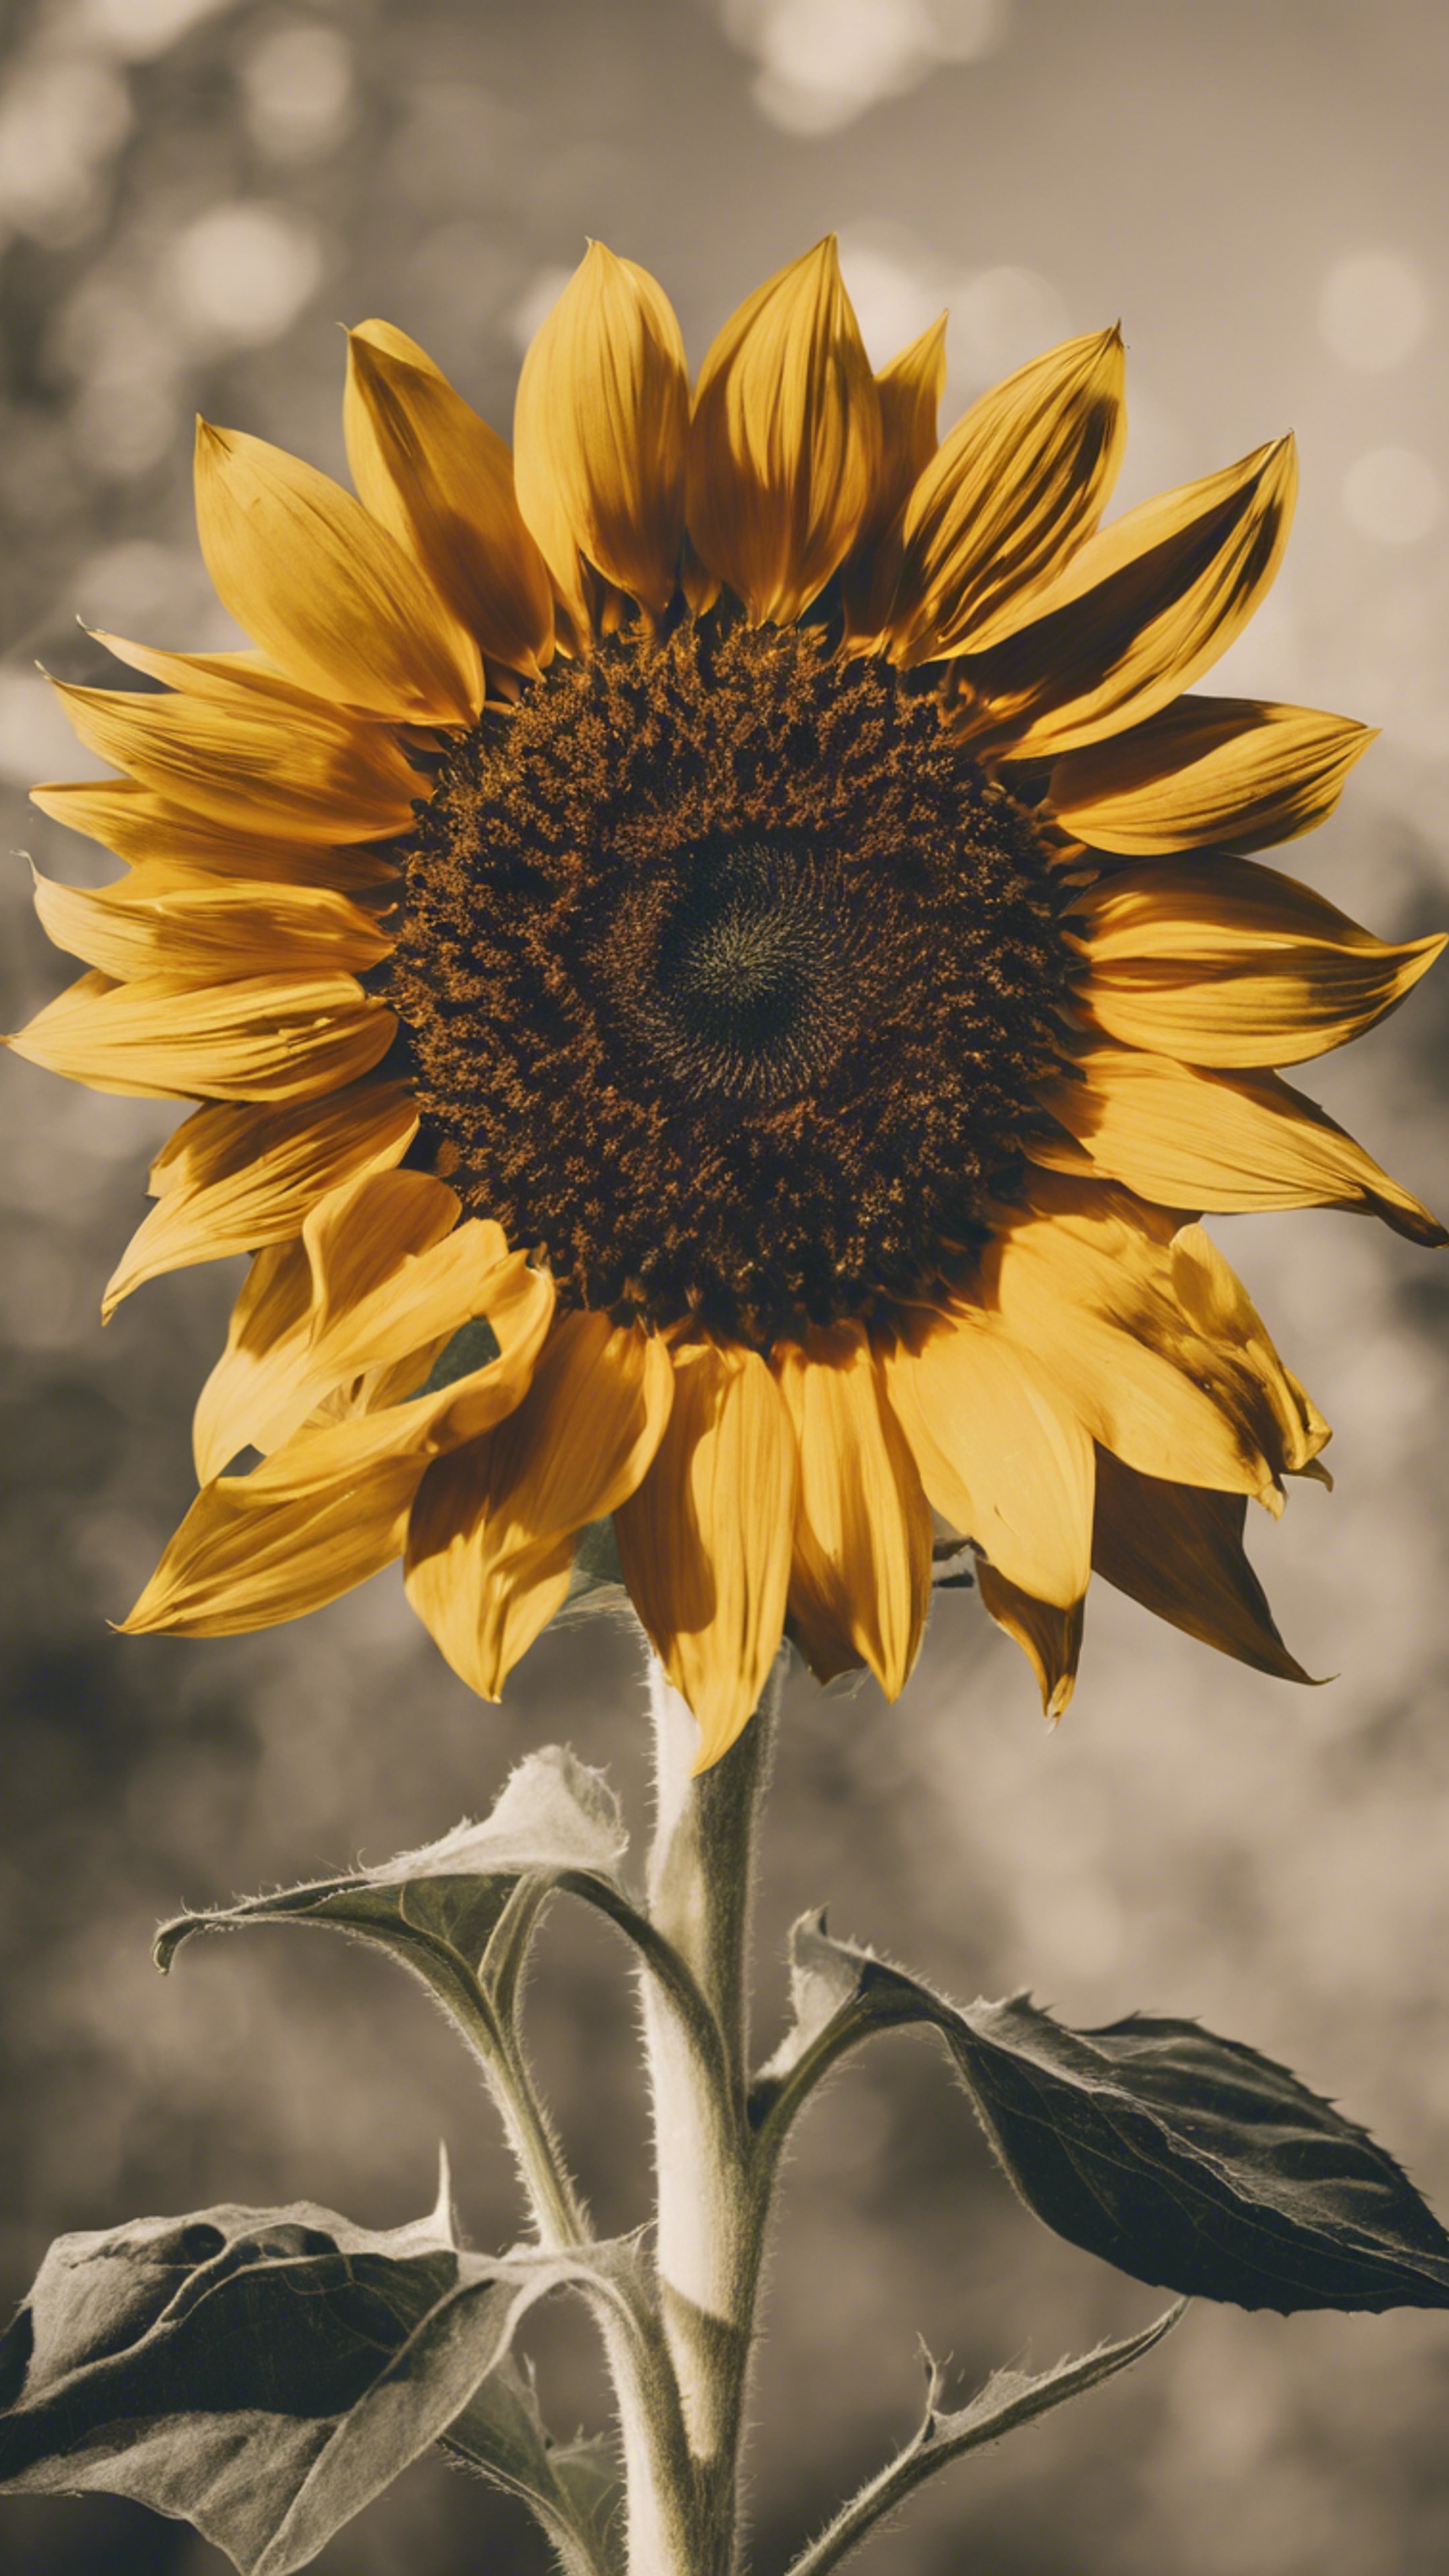 A stylized retro sunflower with bold yellow petals and a dark brown center. Wallpaper[13785a0774844f708a81]